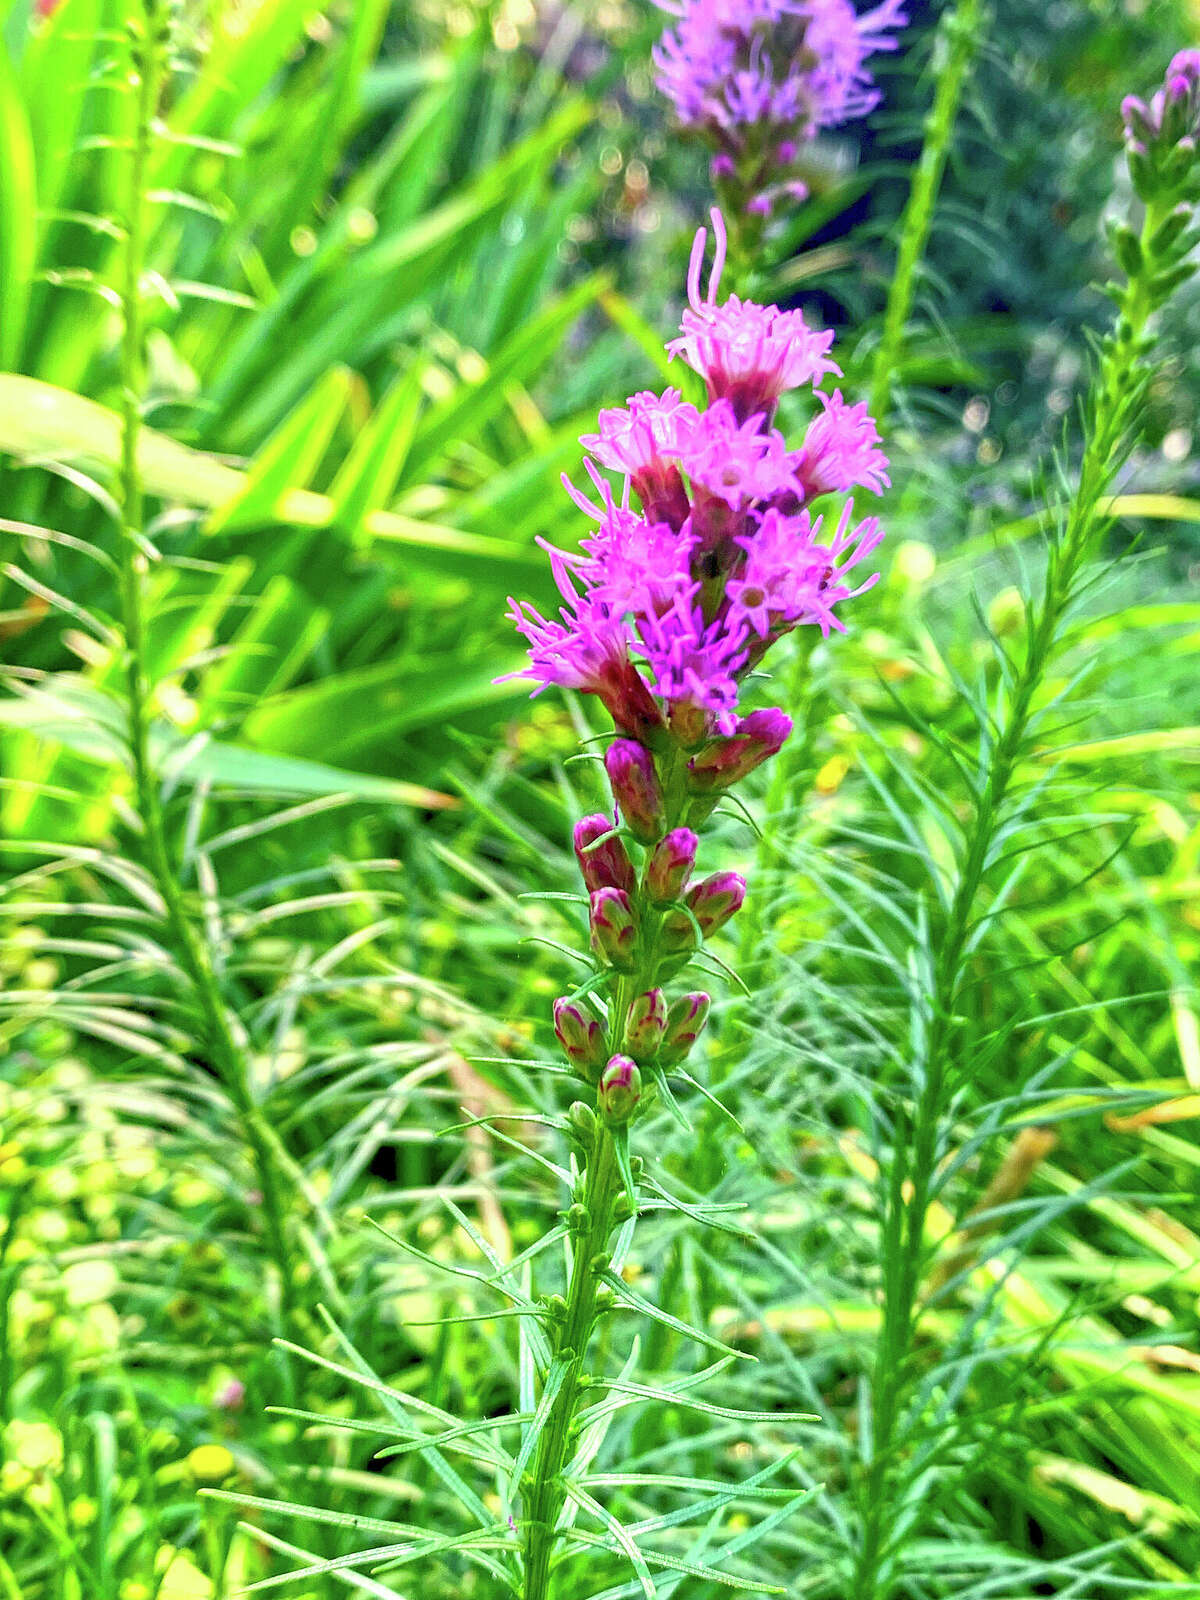 Liatris spicata is known by several common names, including gayfeather and blazing star.